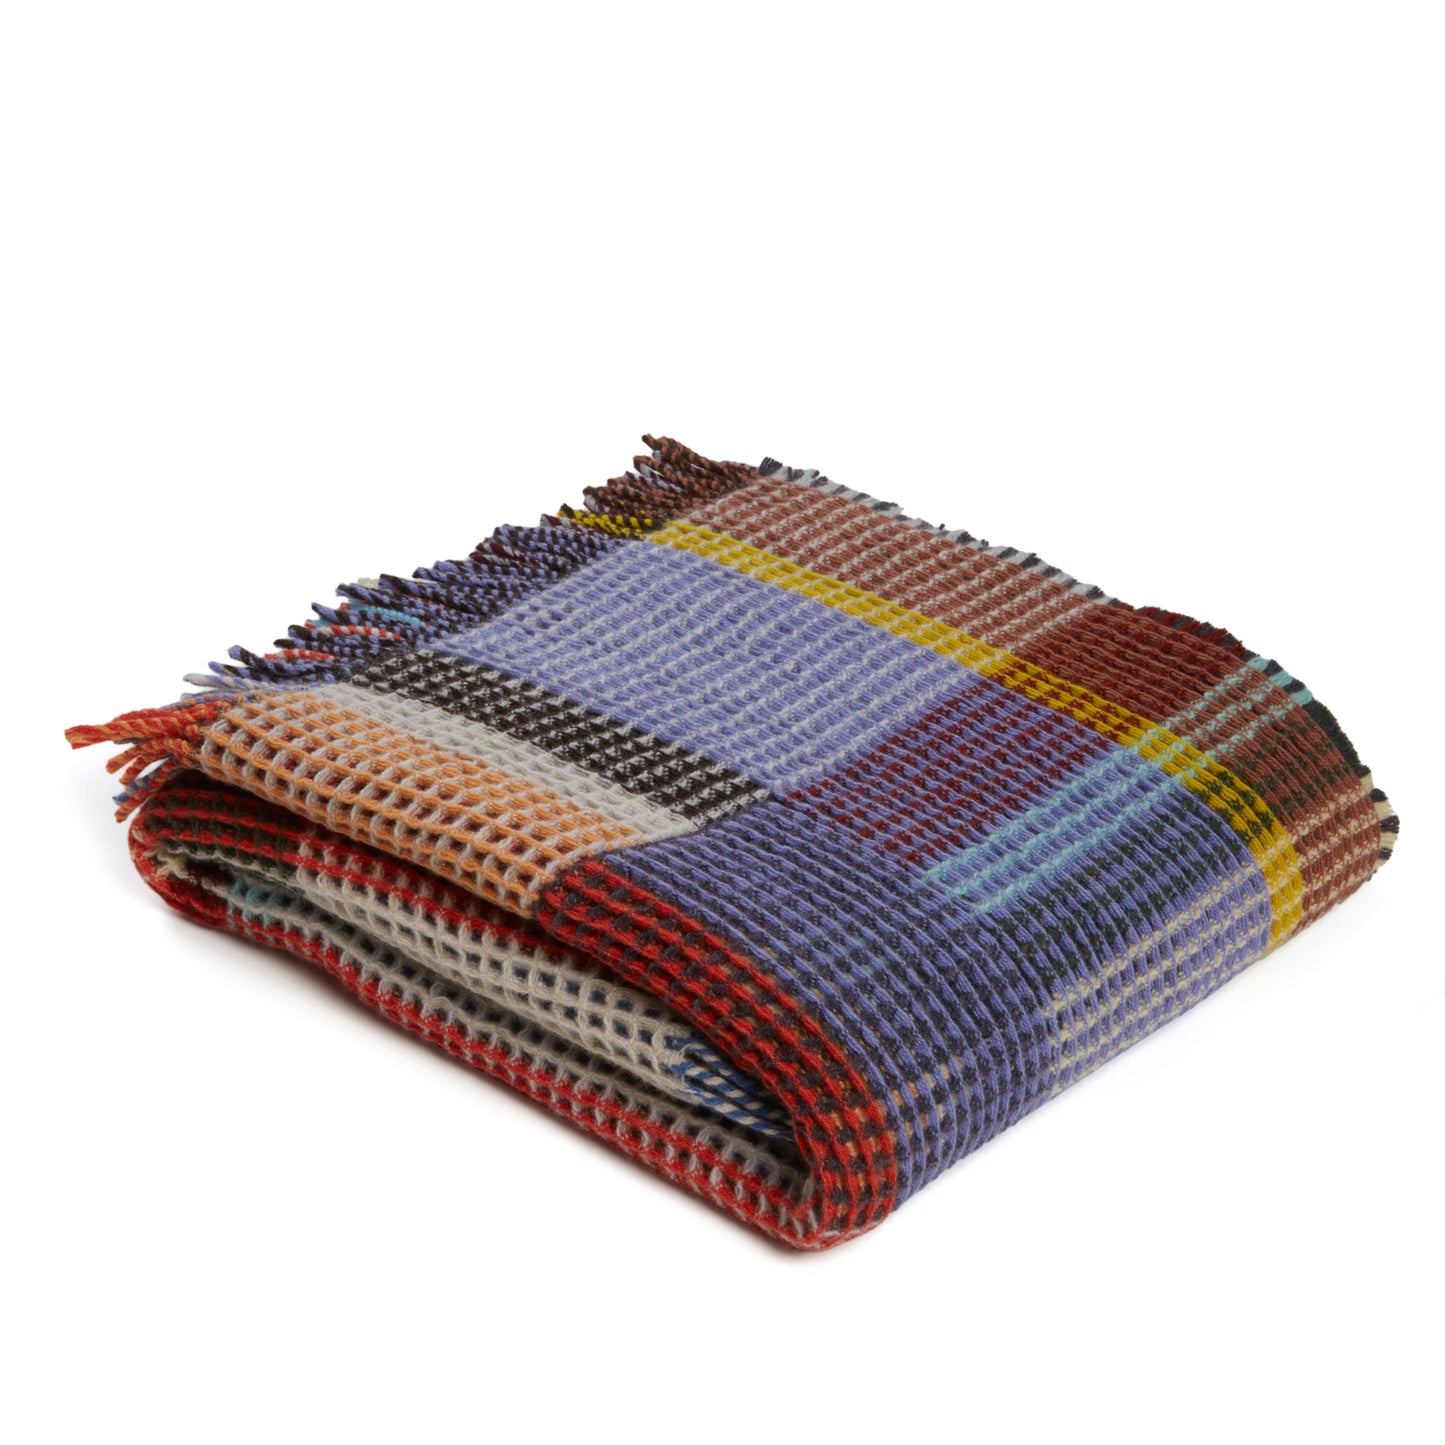 WALLACE+SEWELL - HONEYCOMB THROW - OCTAVIA - LARGE